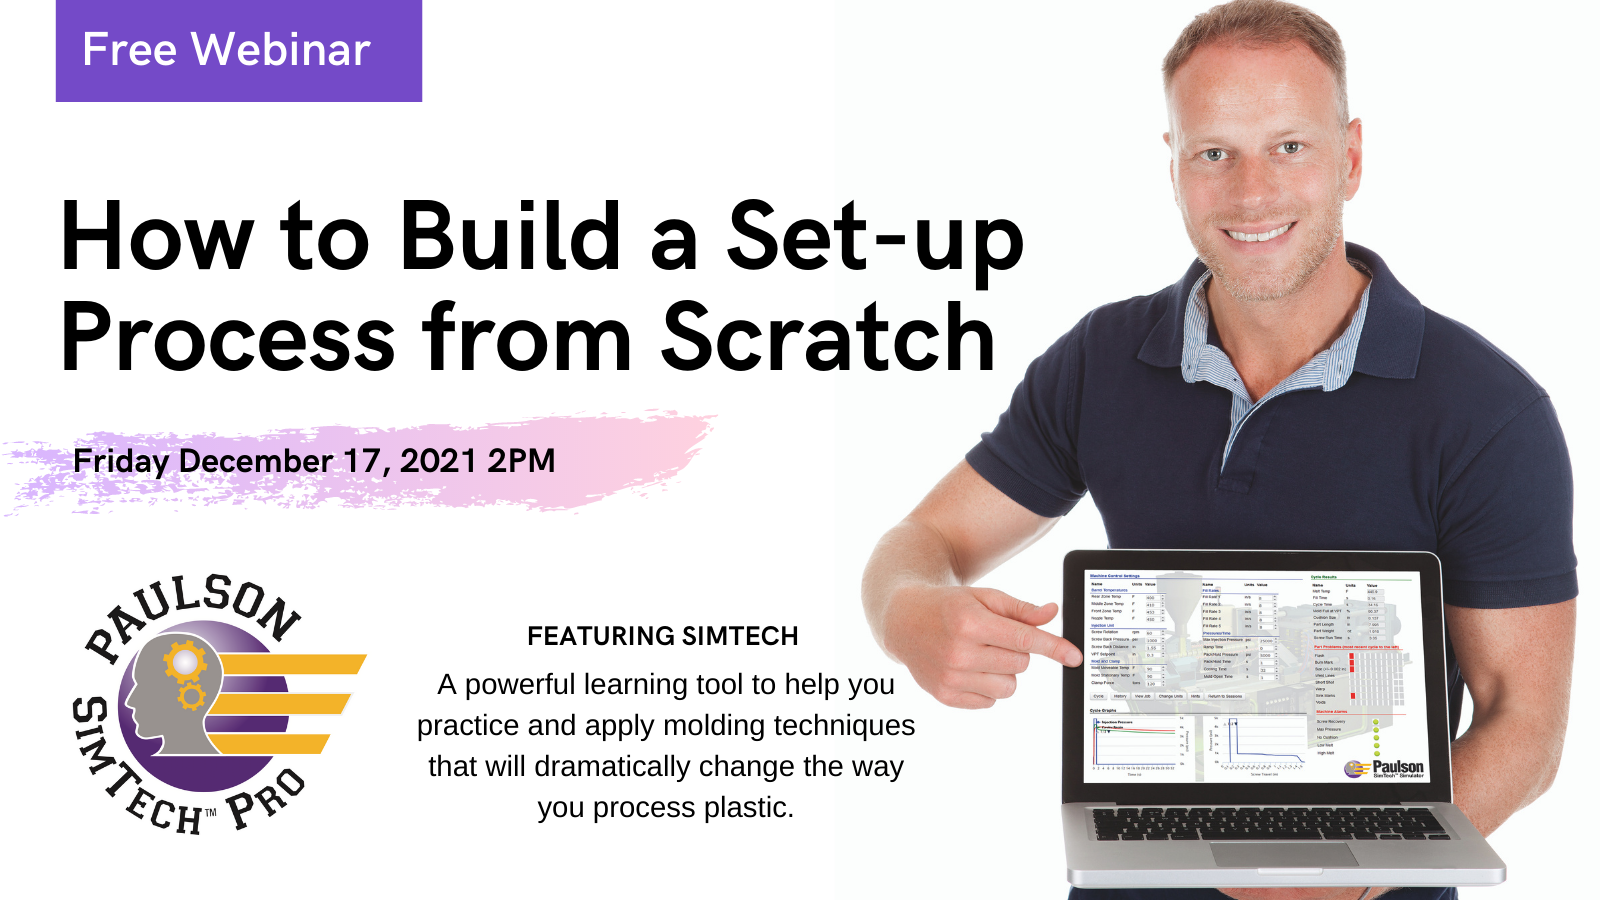 Webinar: How to Build a Set-up Process from Scratch